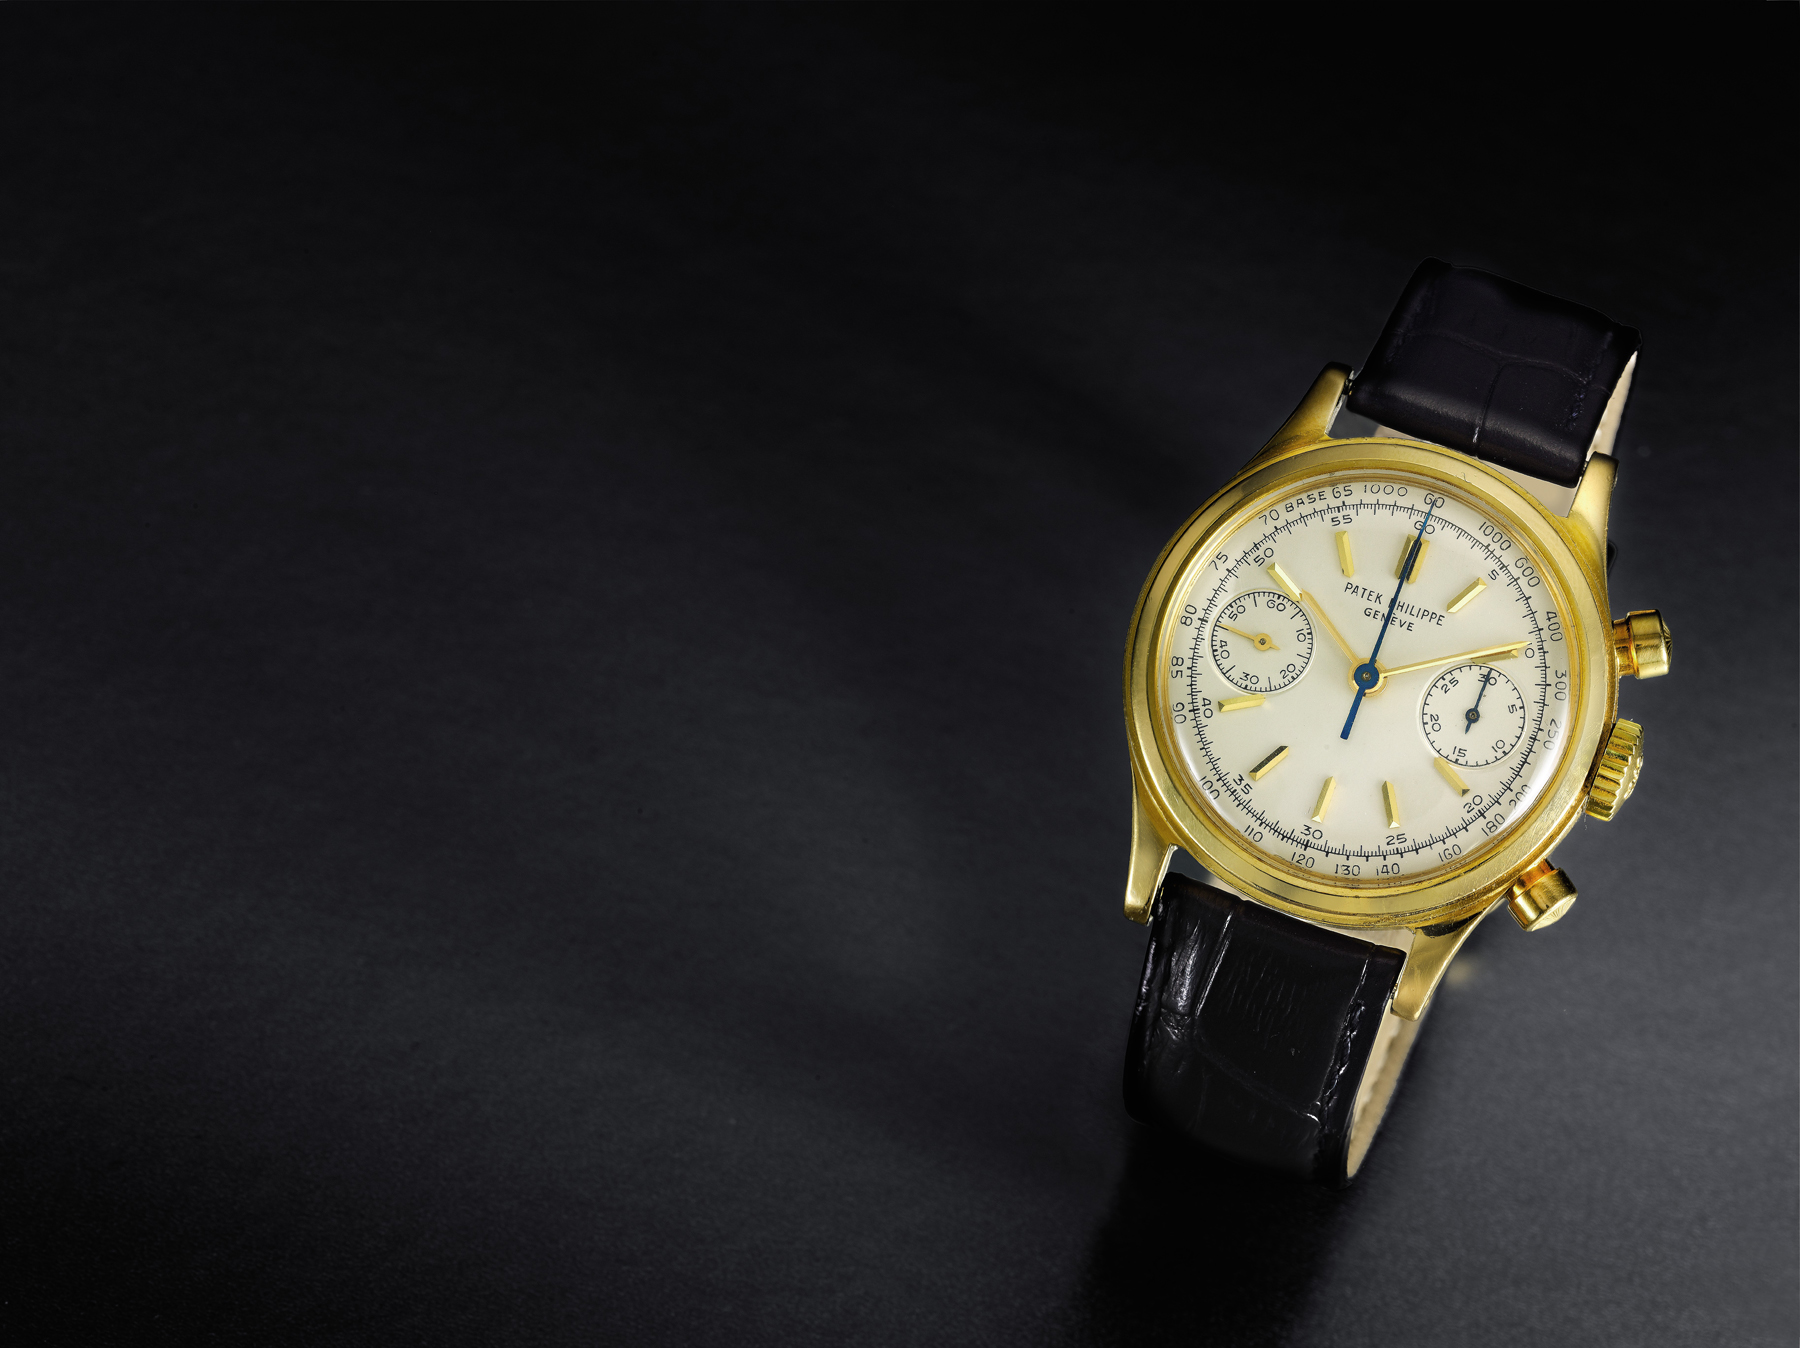 A Fine Yellow Gold Chronograph Wristwatch With Registers And Tachometer Scale Ref 1463 Mvt 869209 Case 2647864 Made In 1966